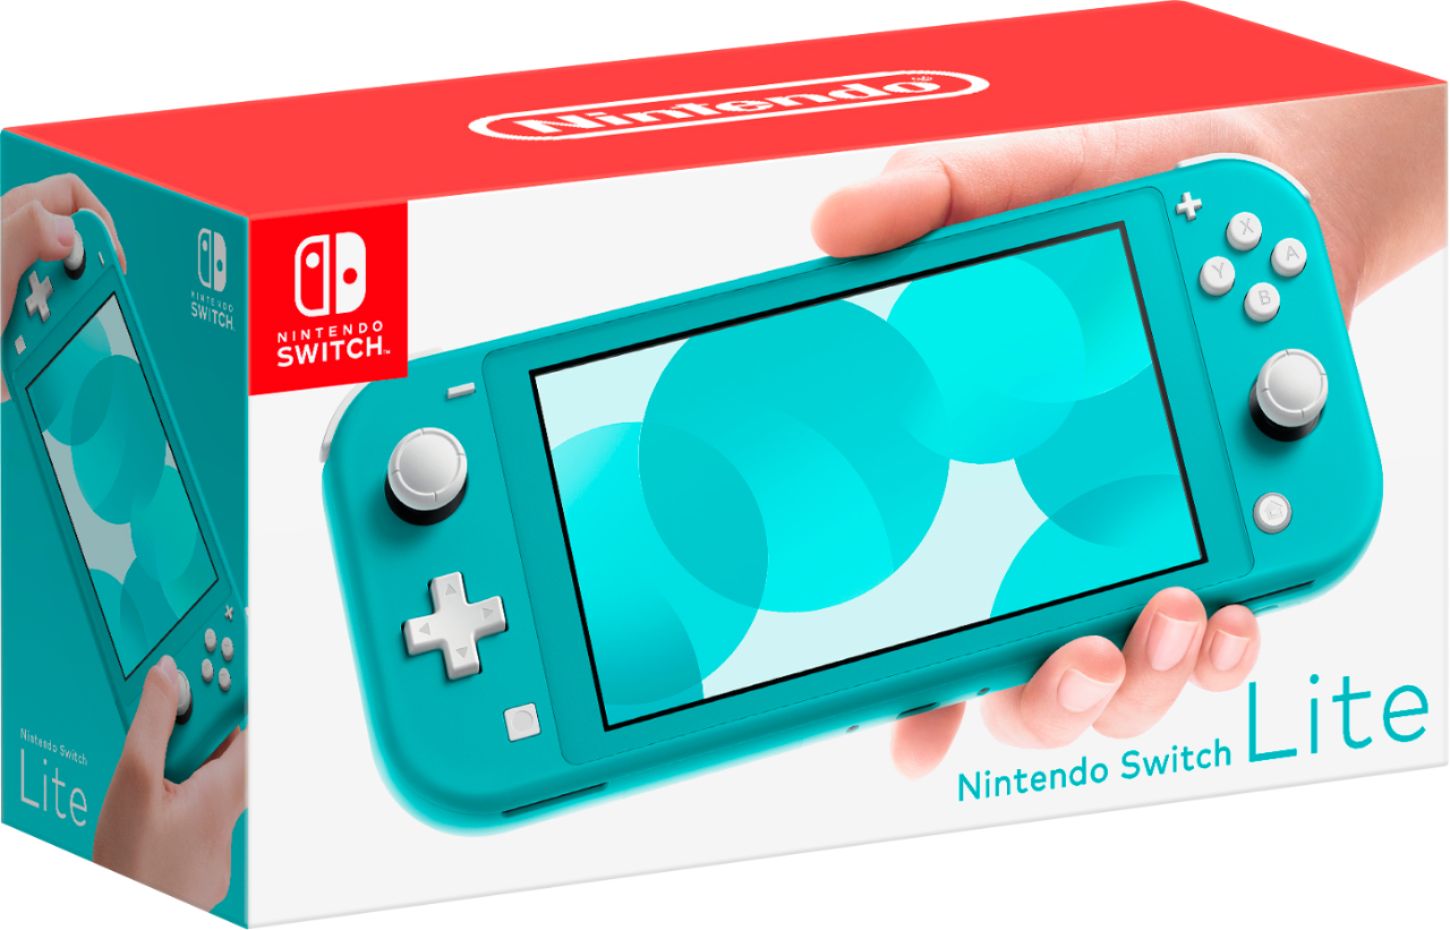 Nintendo Switch Lite Turquoise with Fire Emblem: Three Houses, Mytrix 128GB MicroSD Card and Accessories NS Game Disc Bundle Best Holiday Gift